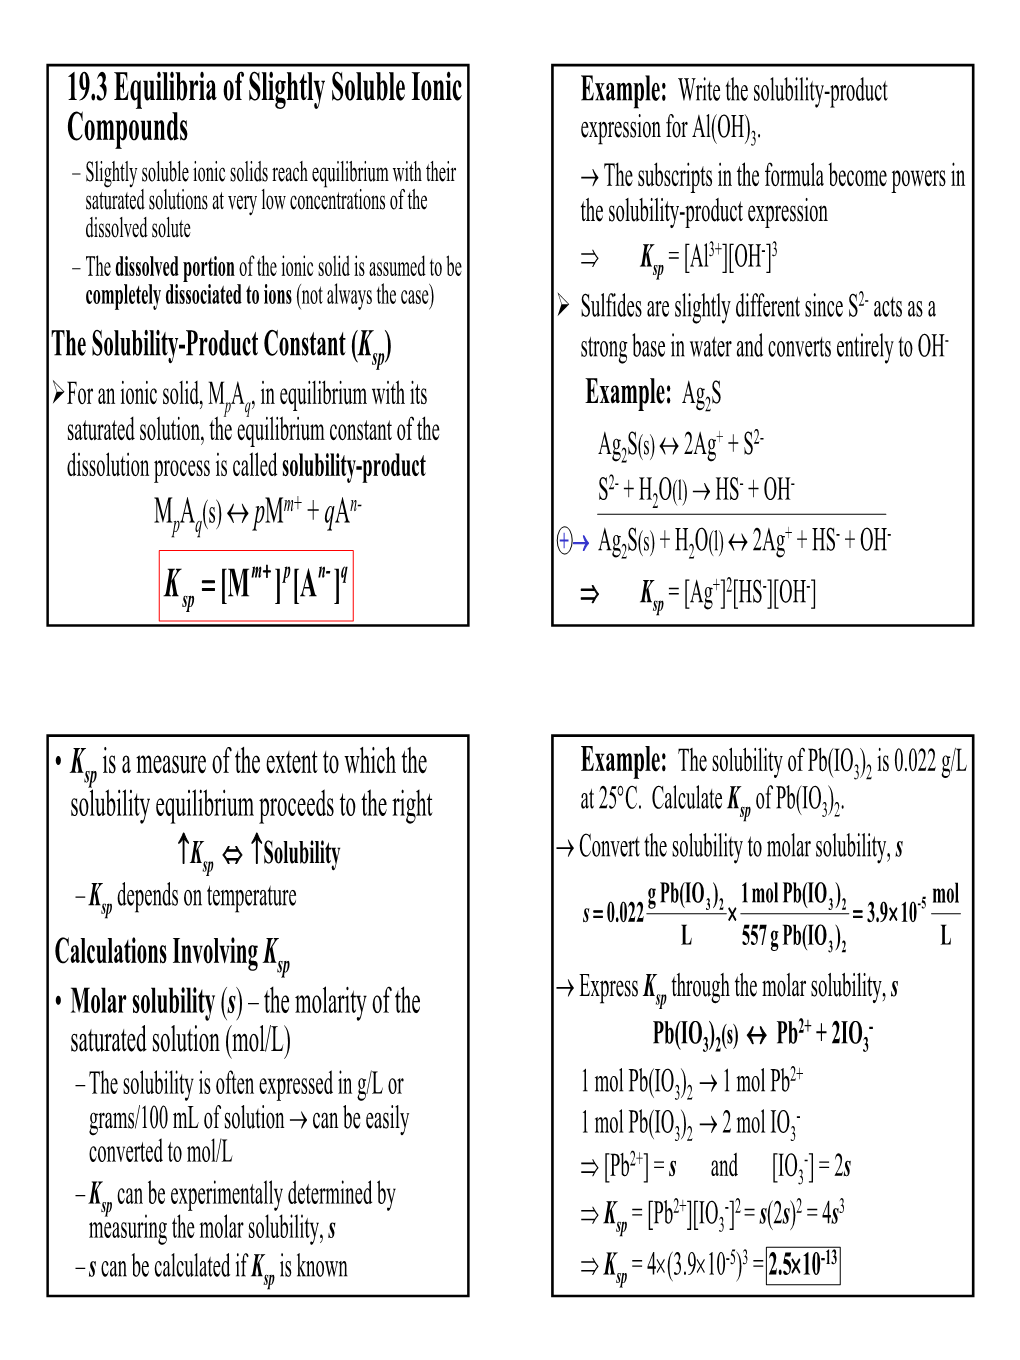 19.3 Equilibria of Slightly Soluble Ionic Compounds K